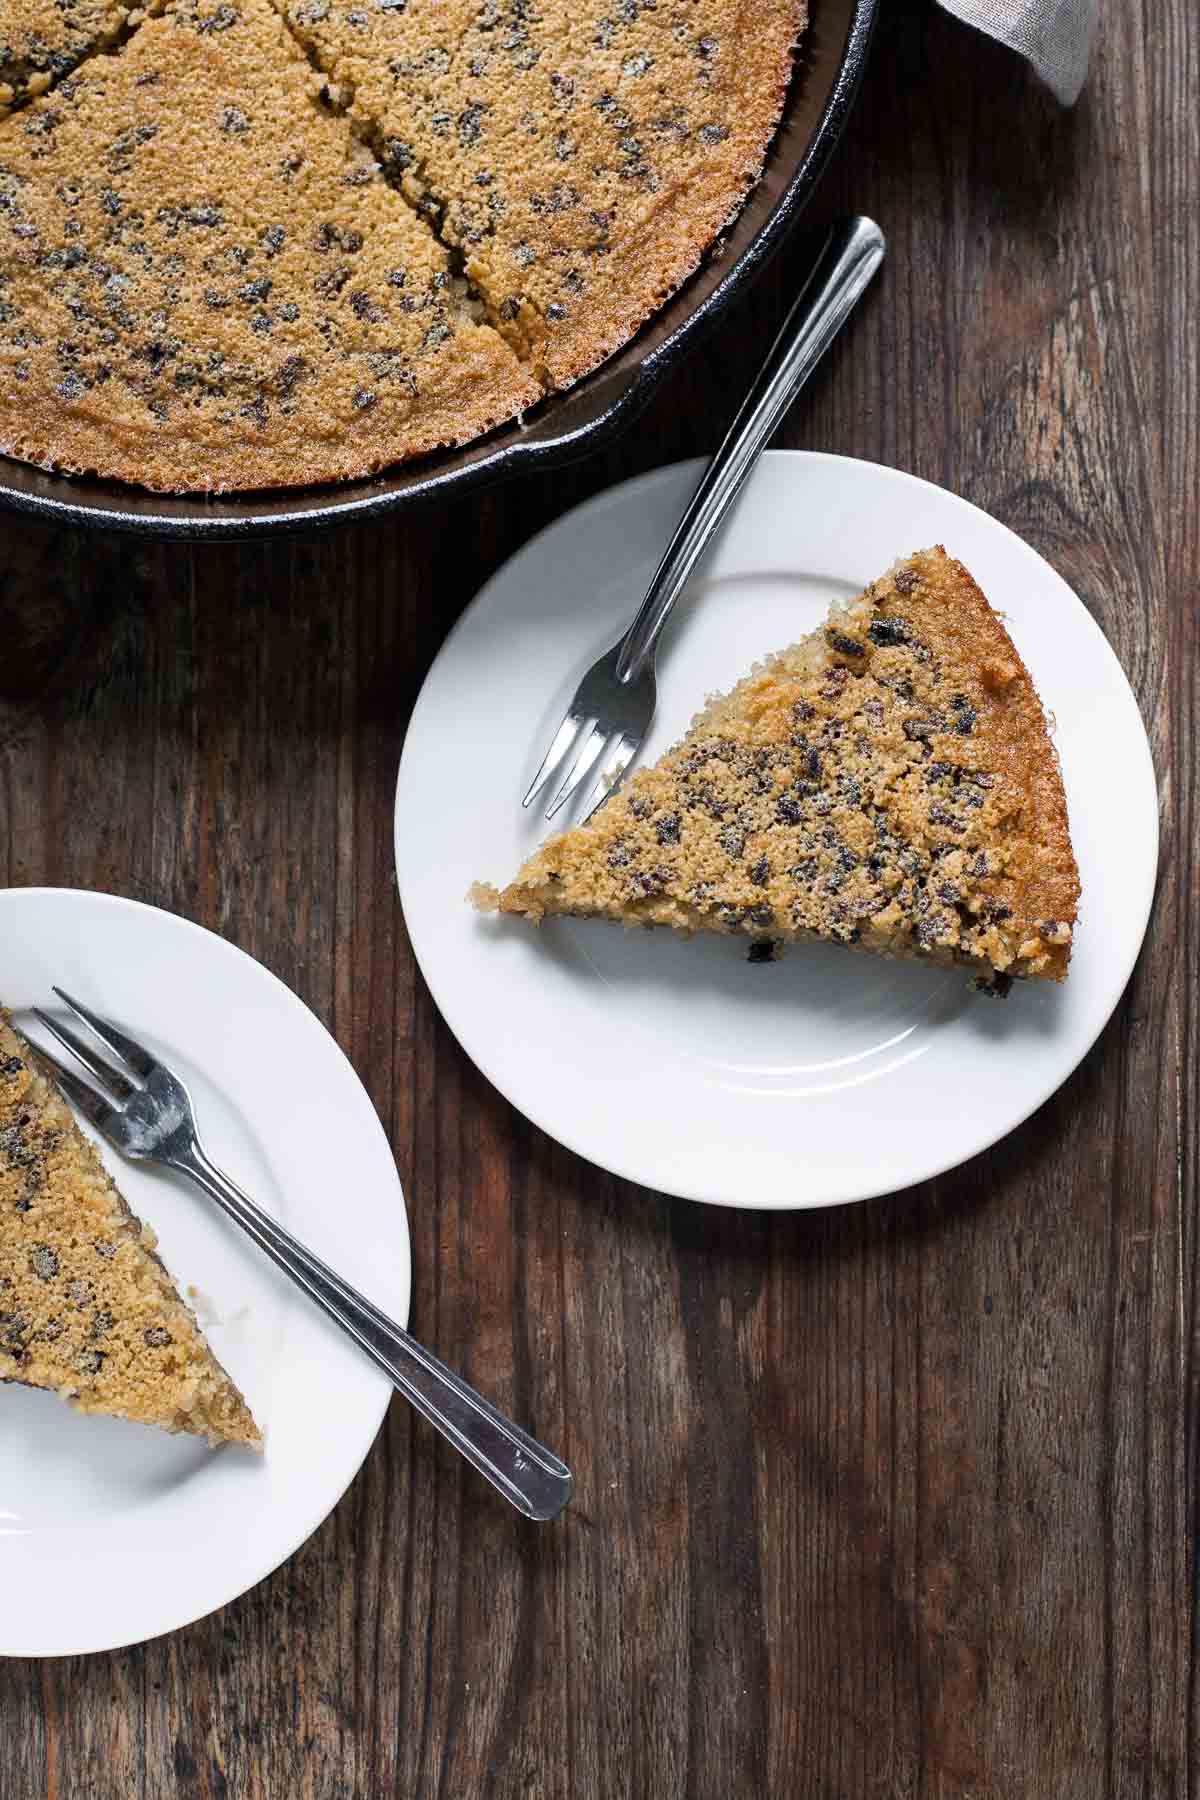 Brown Butter Cacao Nib Skillet Cake (Gluten free, Grain free) | acalculatedwhisk.com